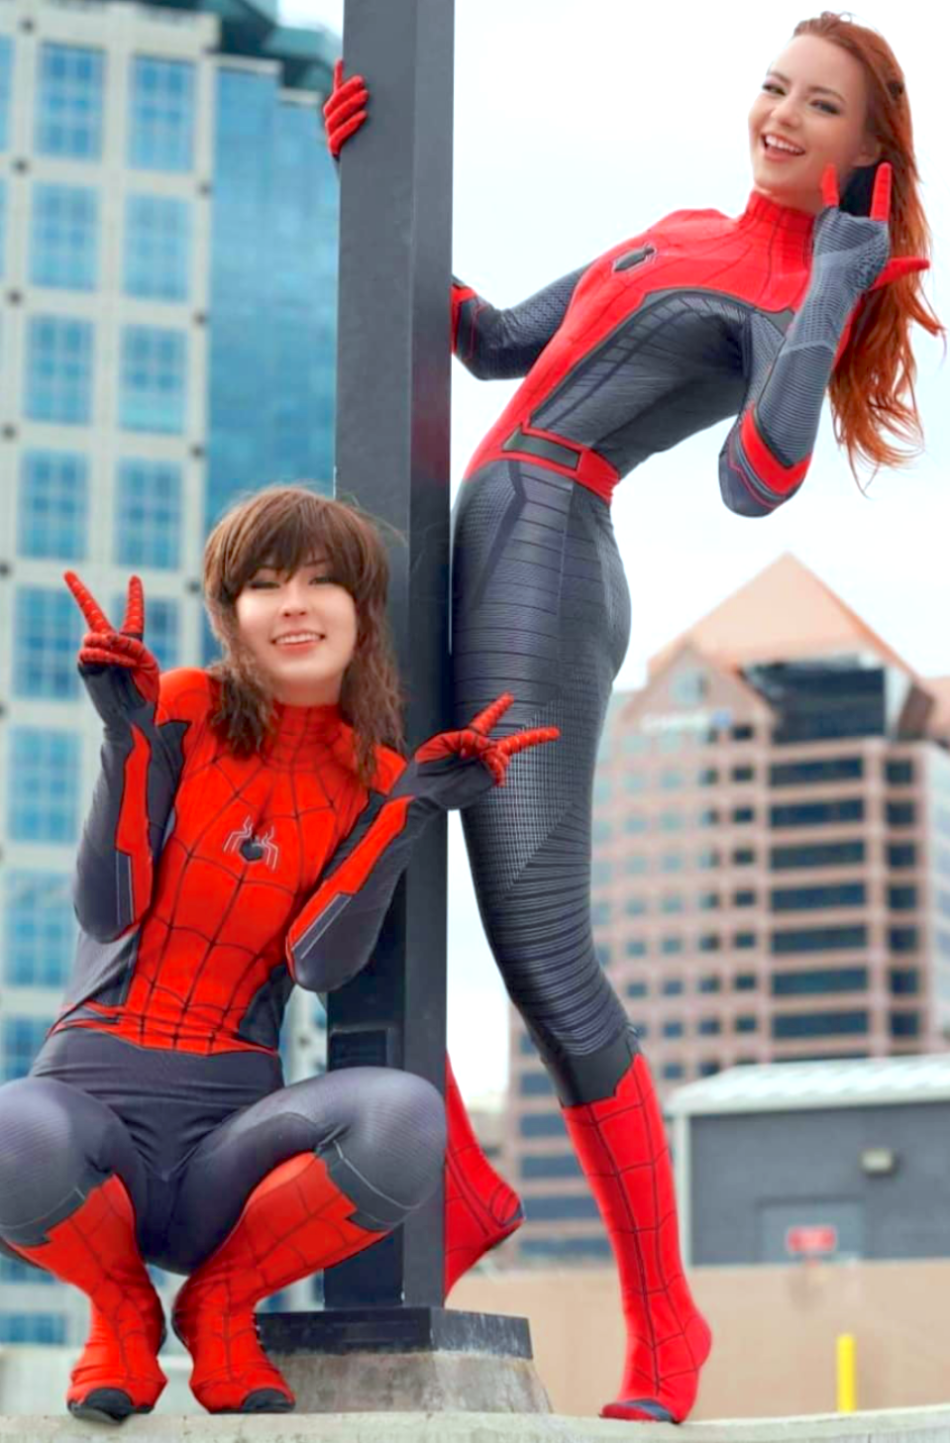 Sexy Red Hot Cosplay Girls Spiderman Women Best Photo Compilation 2021 (89 HQ Photos) 27